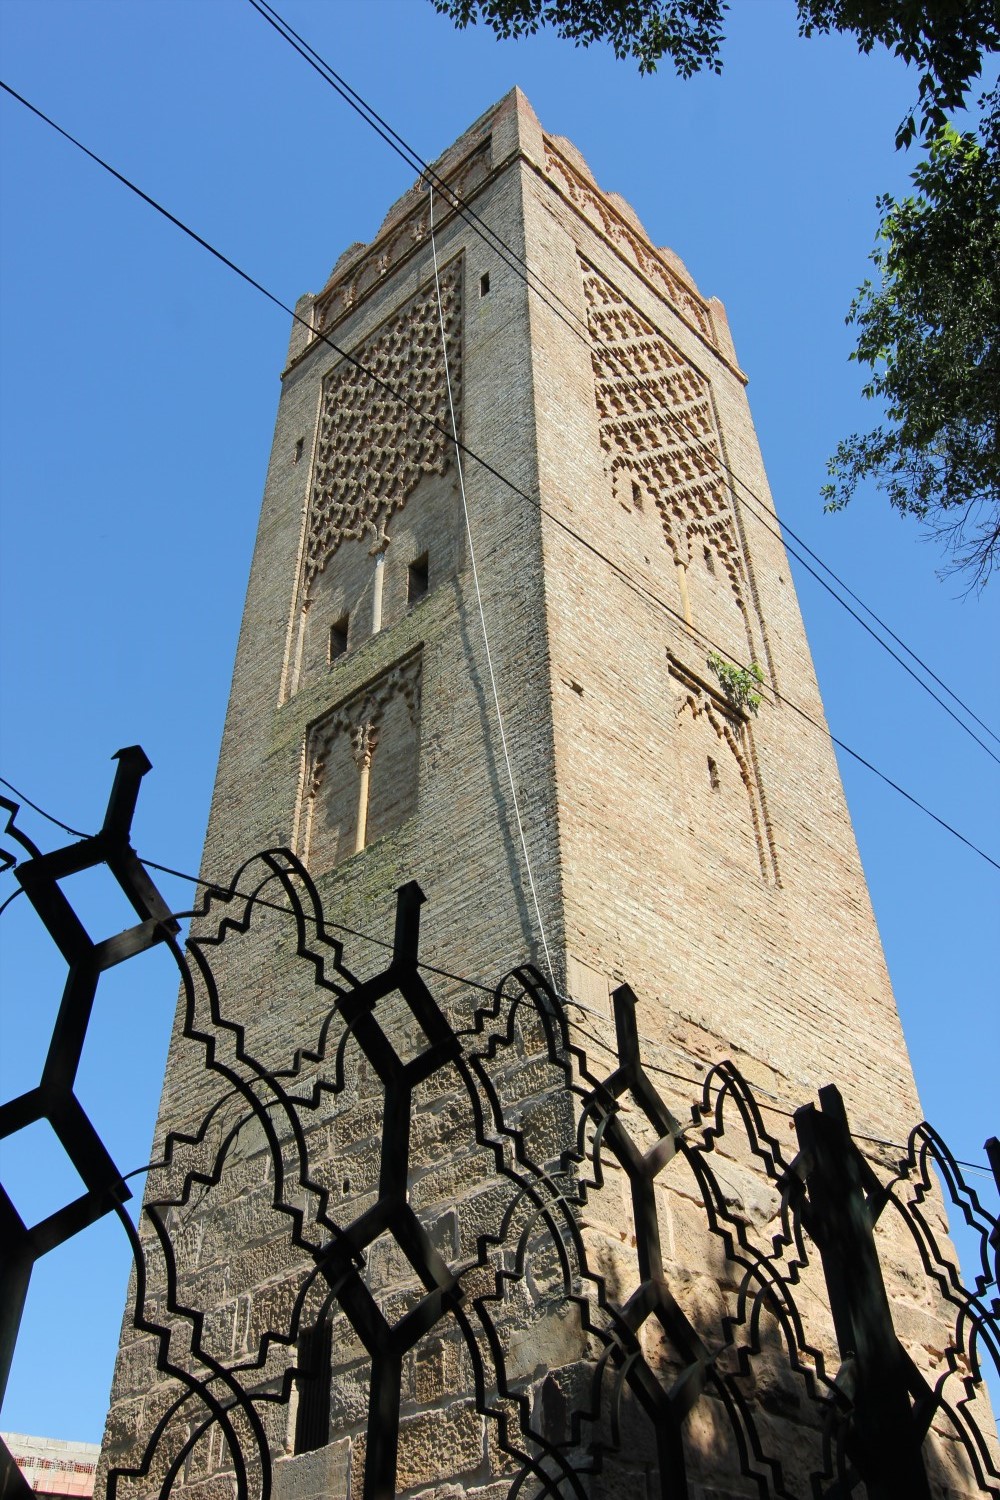 View of the north and west sides of the minaret